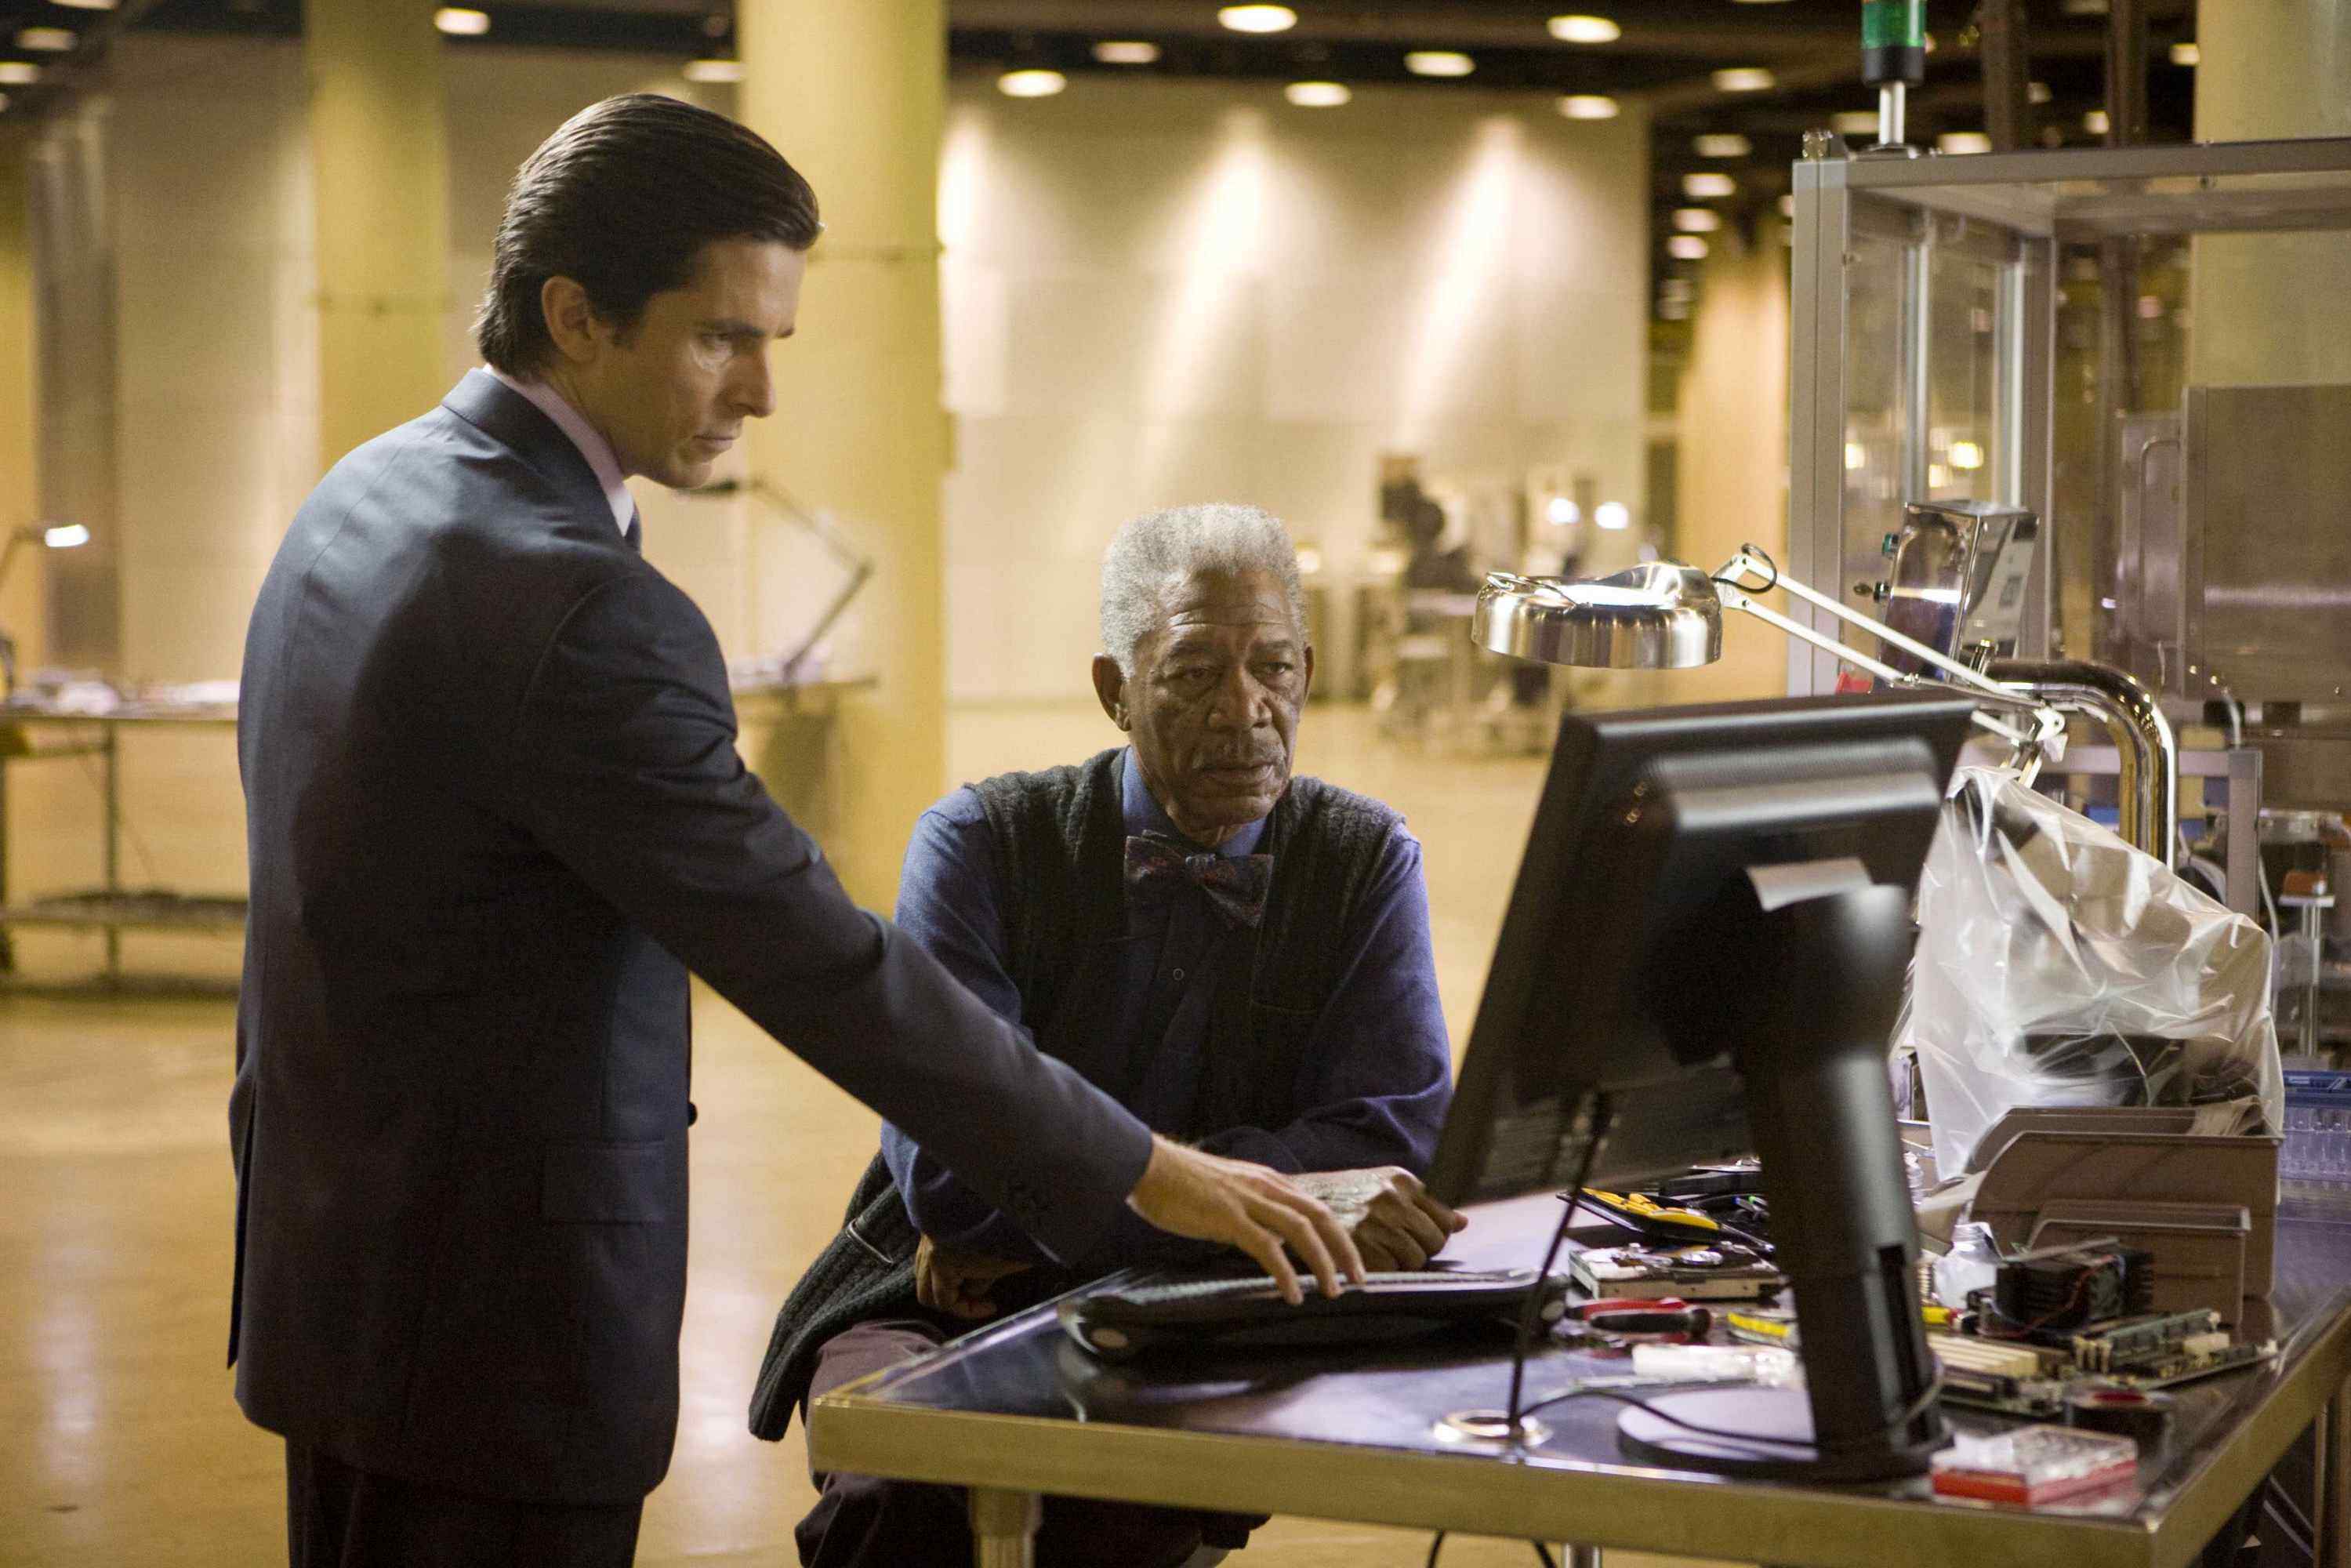 CHRISTIAN BALE stars as Bruce Wayne and MORGAN FREEMAN as Lucius Fox in Warner Bros. Pictures' and Legendary Pictures' action drama 